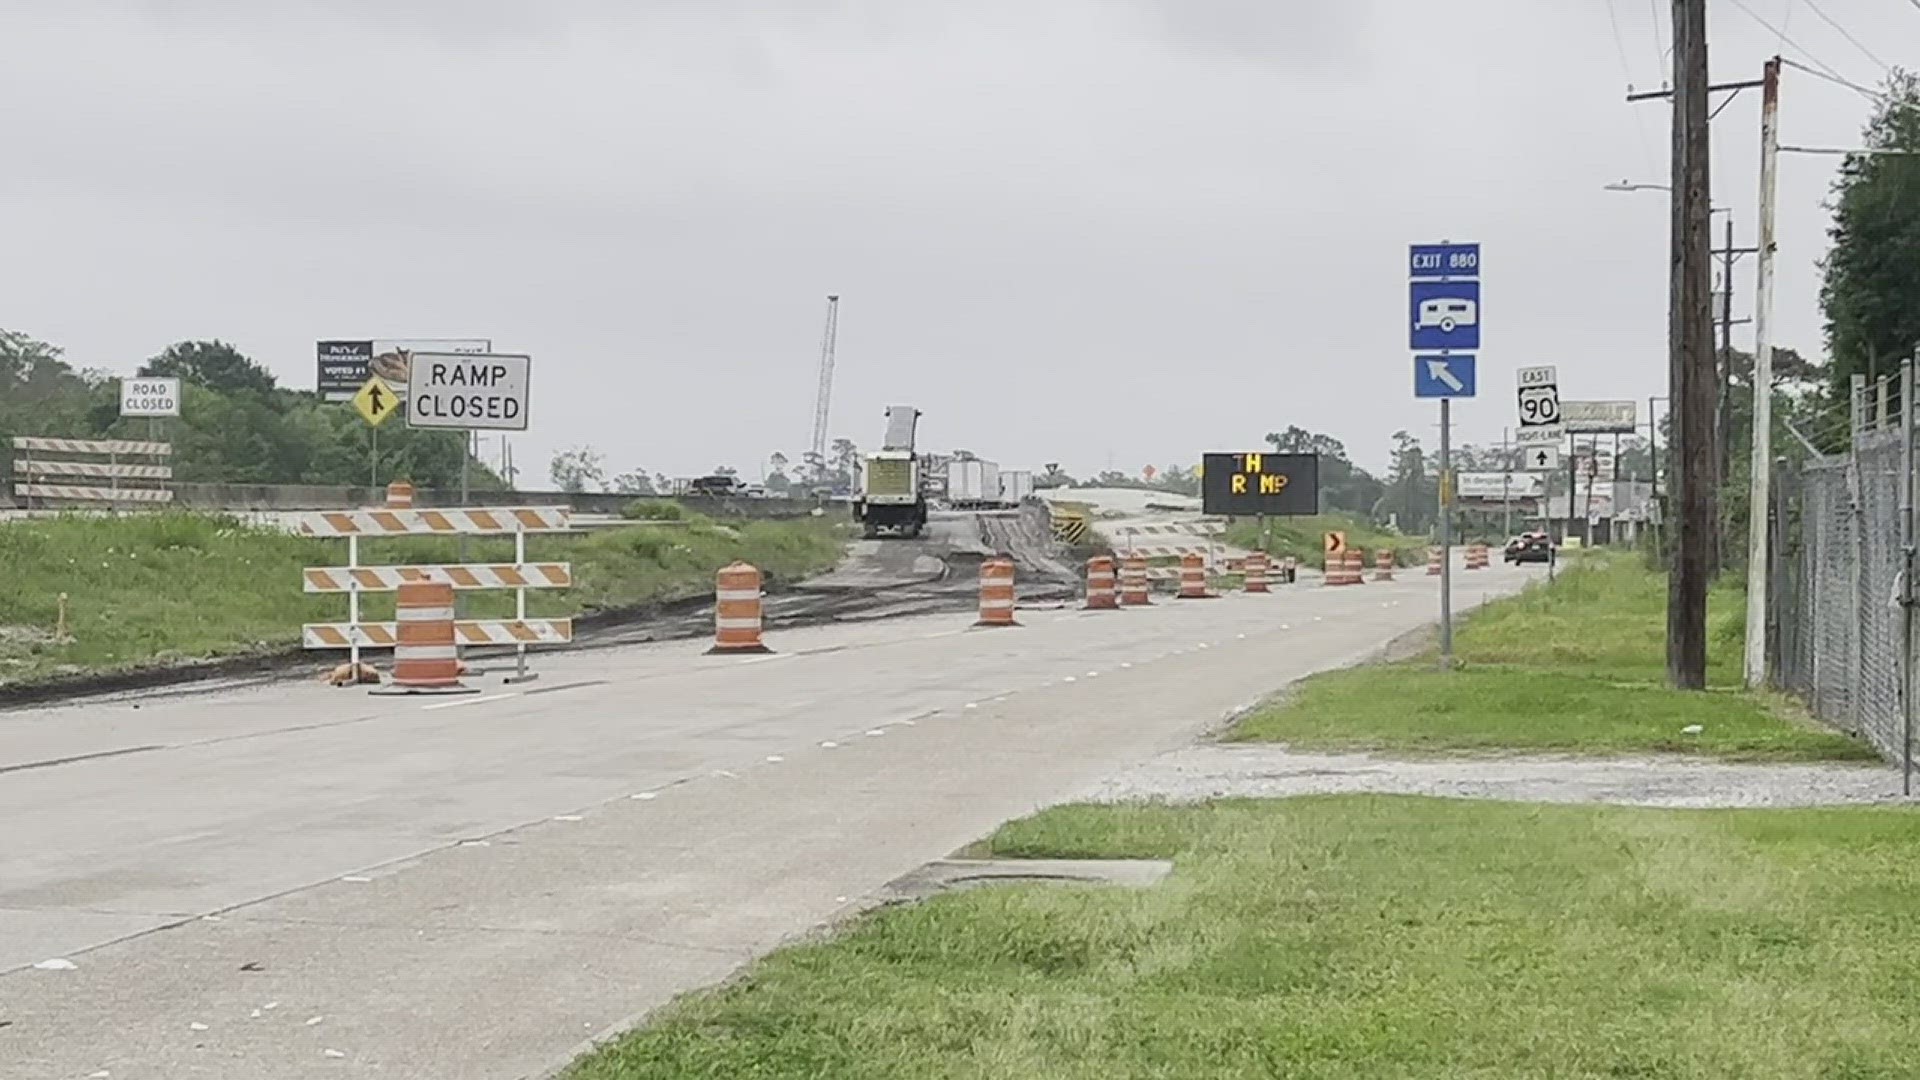 The on-ramp closed today and will stay closed through the summer.